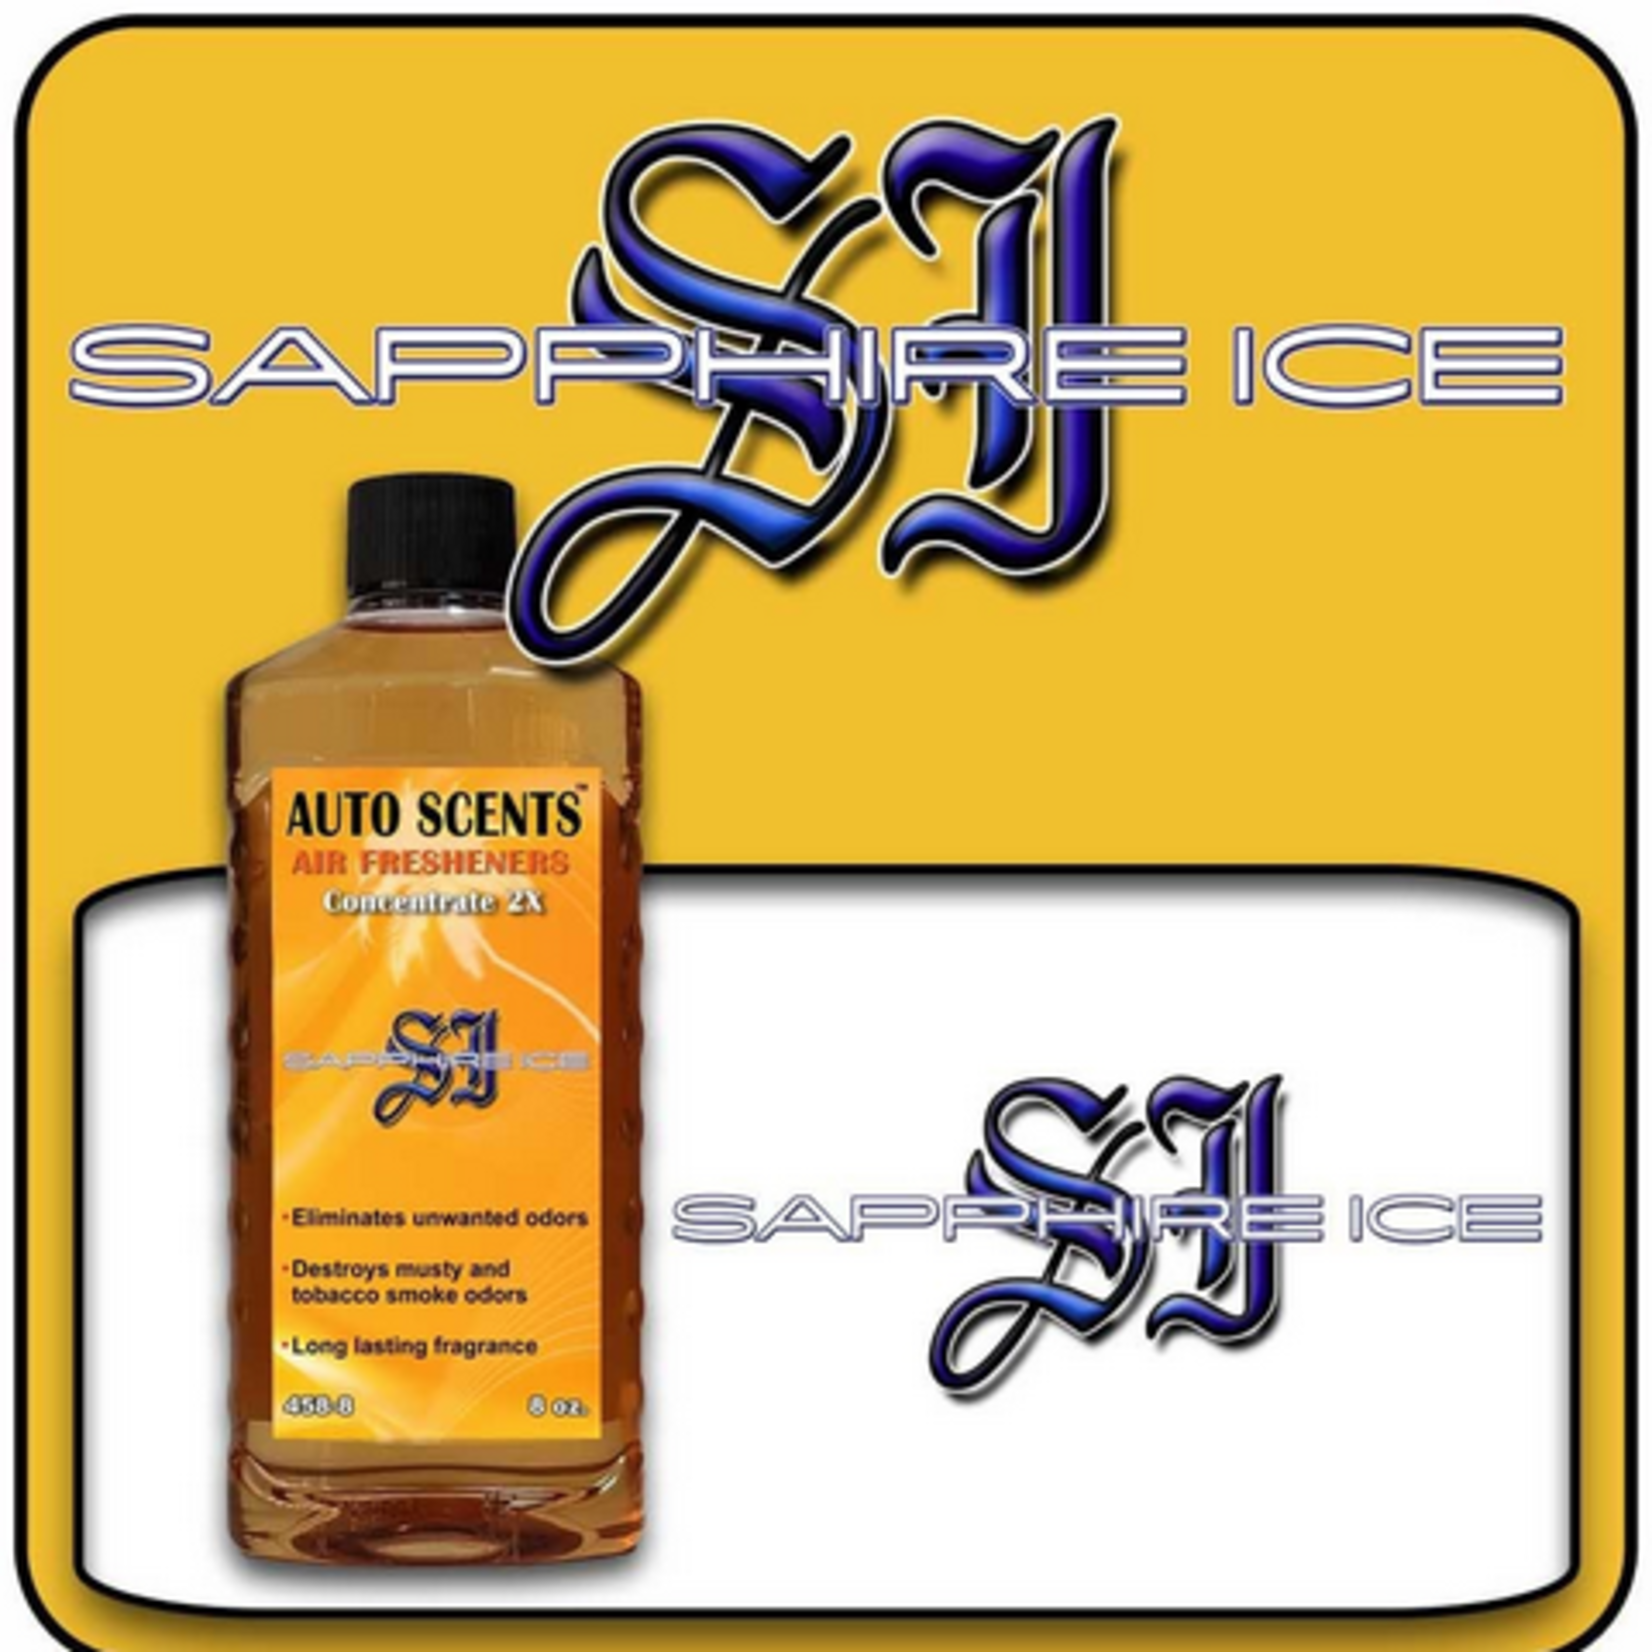 Auto Scents Auto Scents Air Fresheners - Sapphire Ice 2X Concentrate